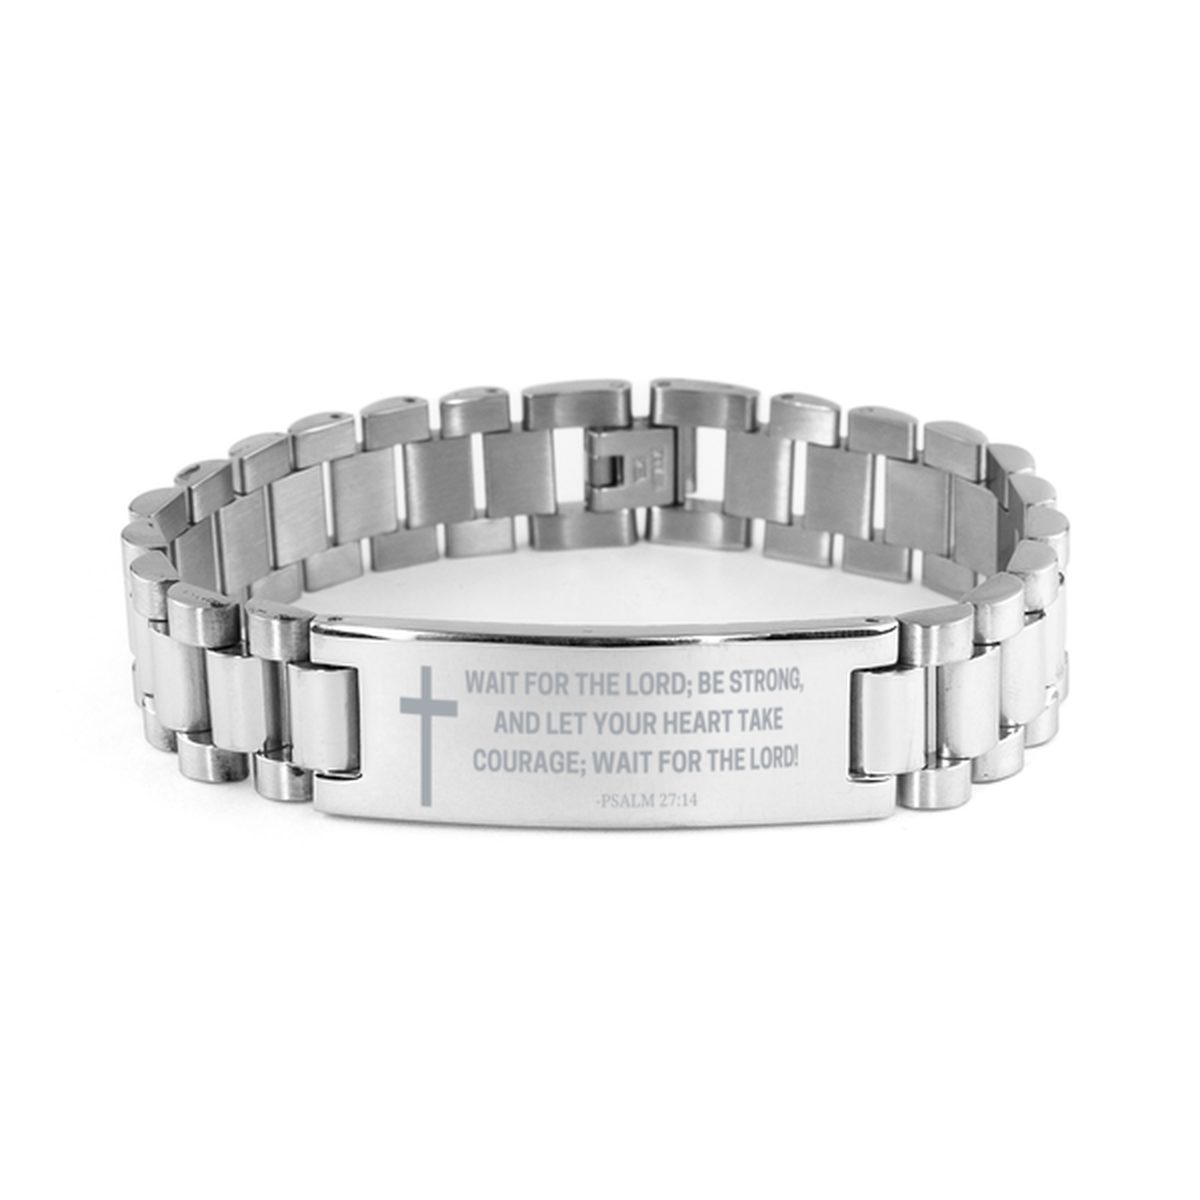 Baptism Gifts For Teenage Boys Girls, Christian Bible Verse Ladder Stainless Steel Bracelet, Wait for the Lord, Catholic Confirmation Gifts for Son, Godson, Grandson, Nephew